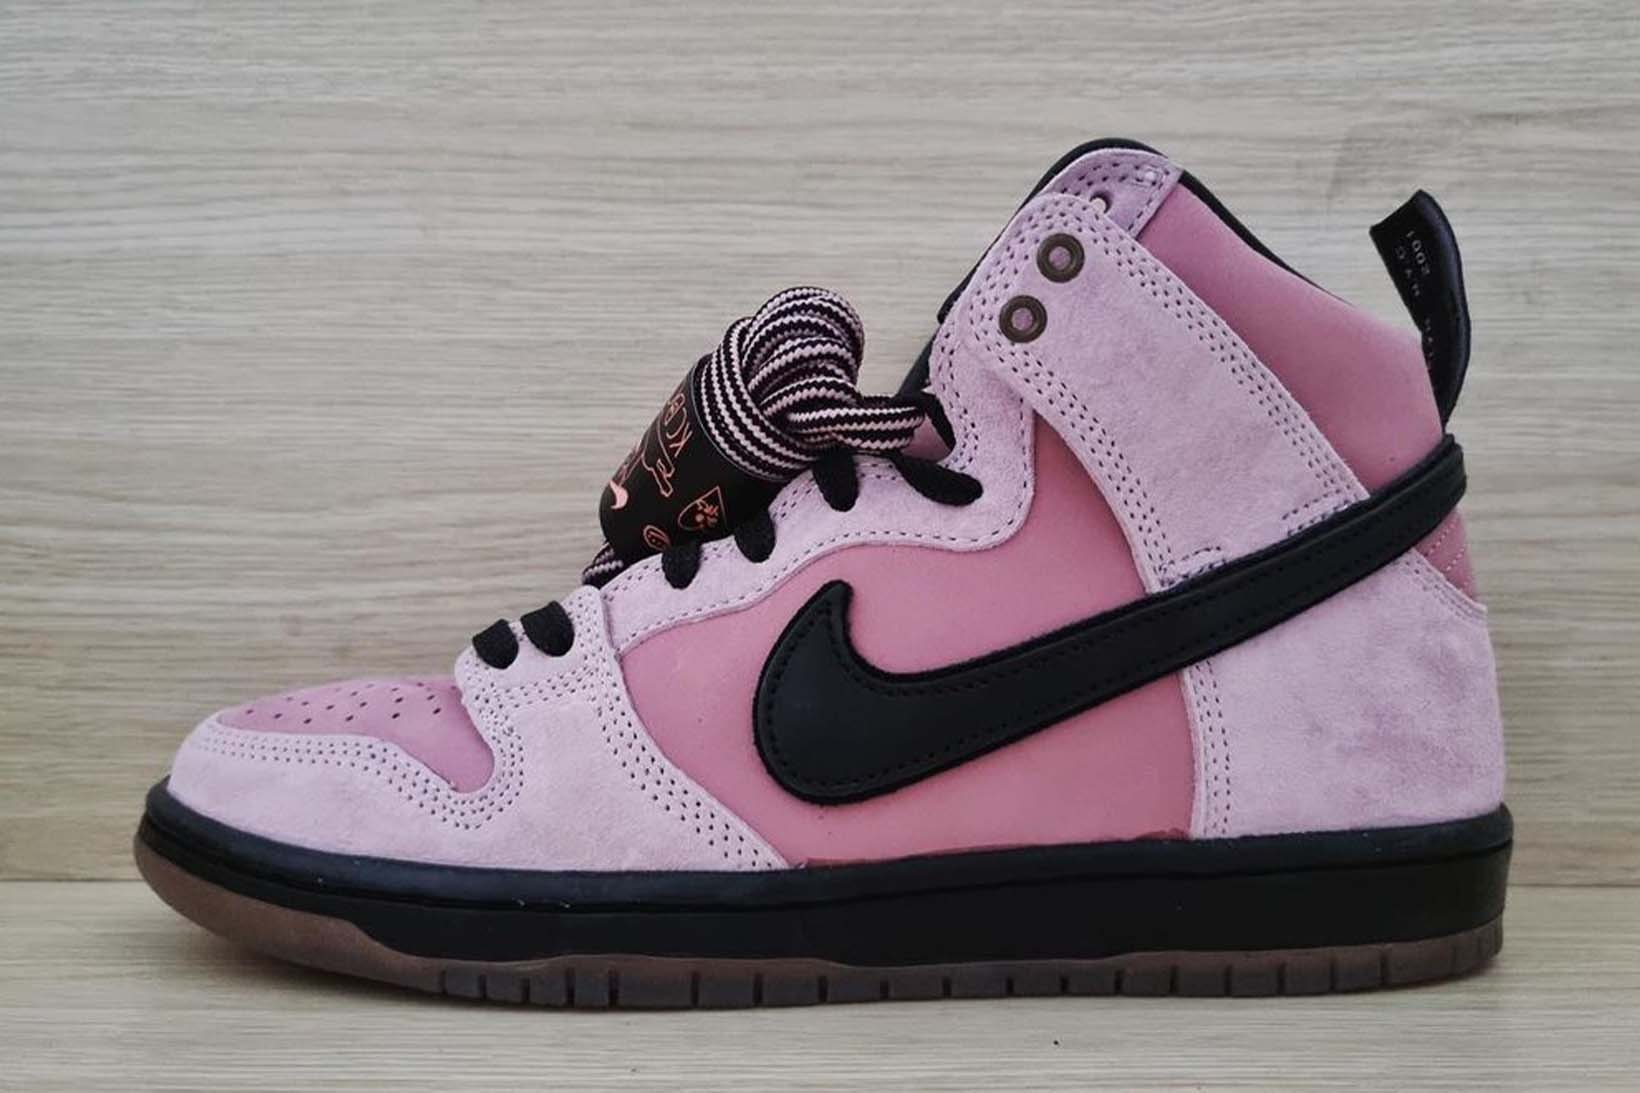 KCDC Nike Dunk SB High Pink Black Price Release Date